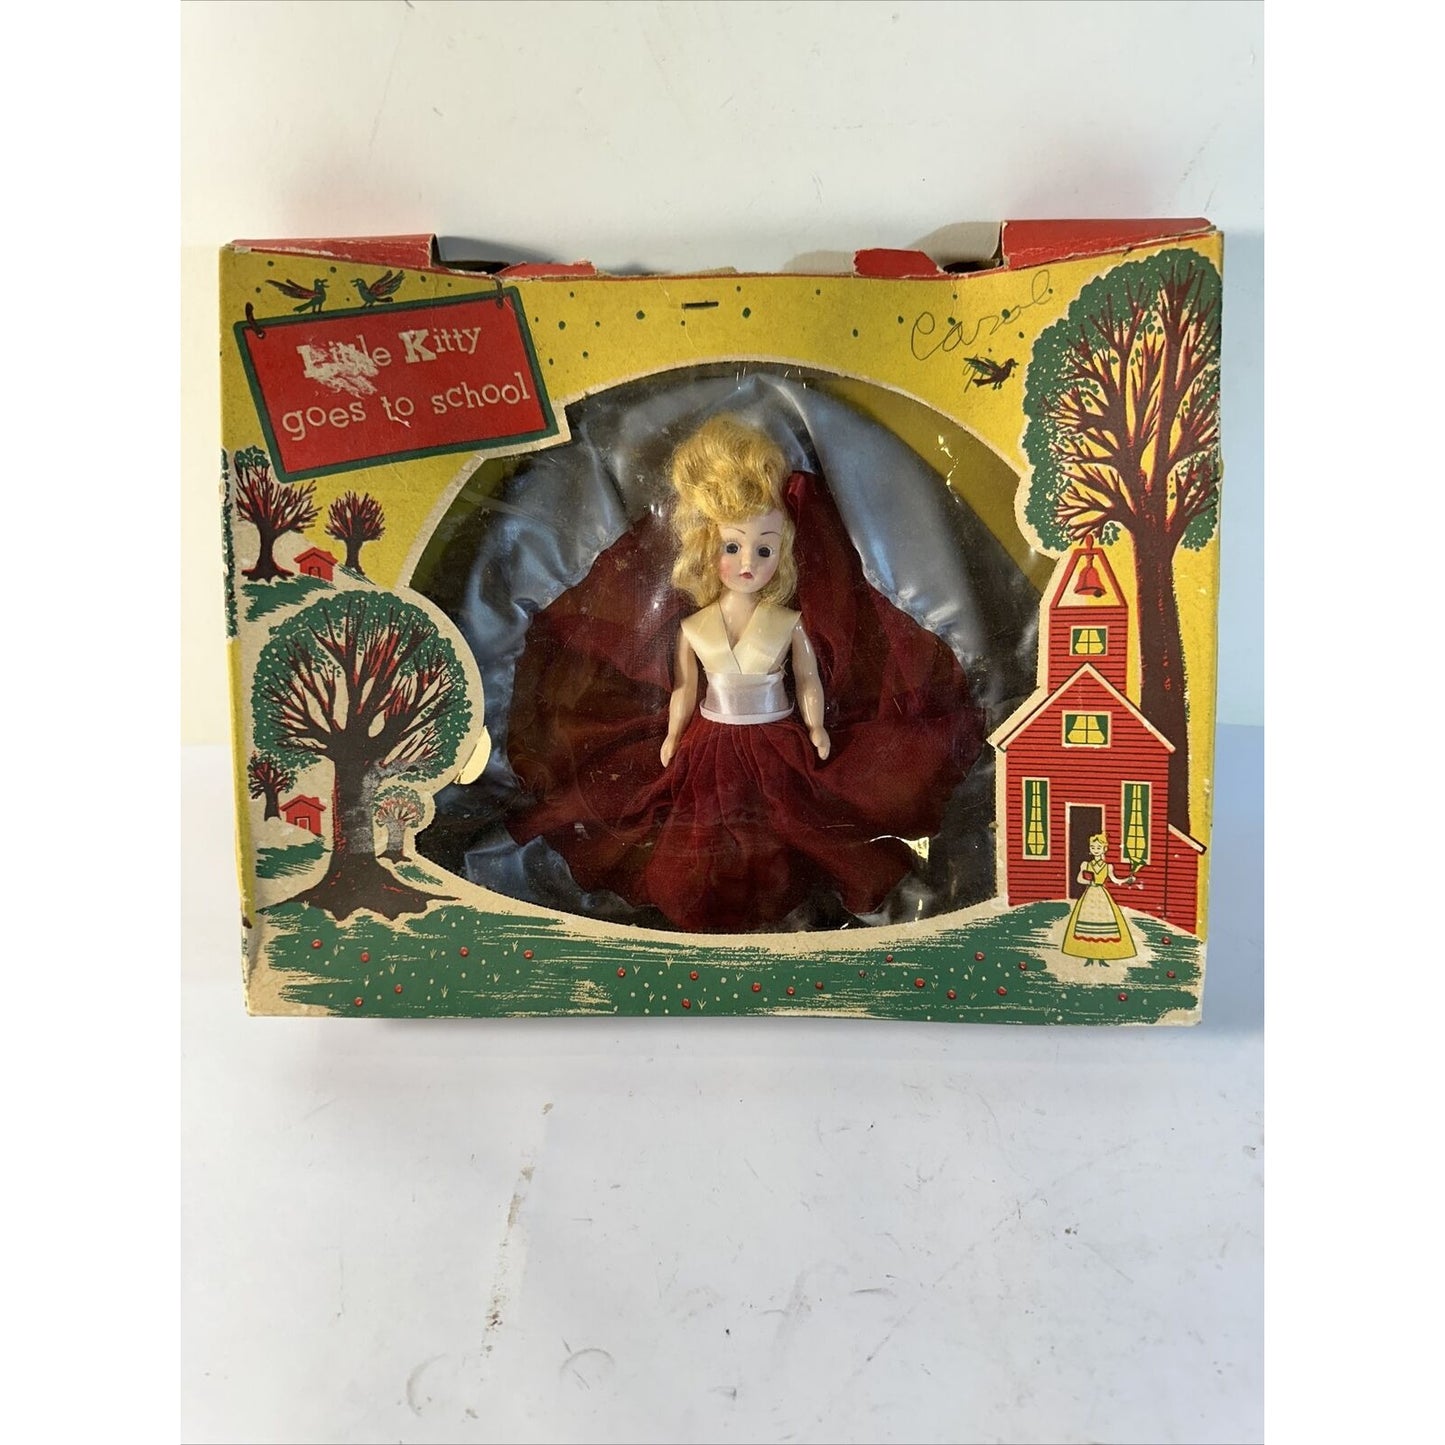 Fortune Toys 1950's Ninette Pam Doll Little Kitty Goes to School 8" Red Dress